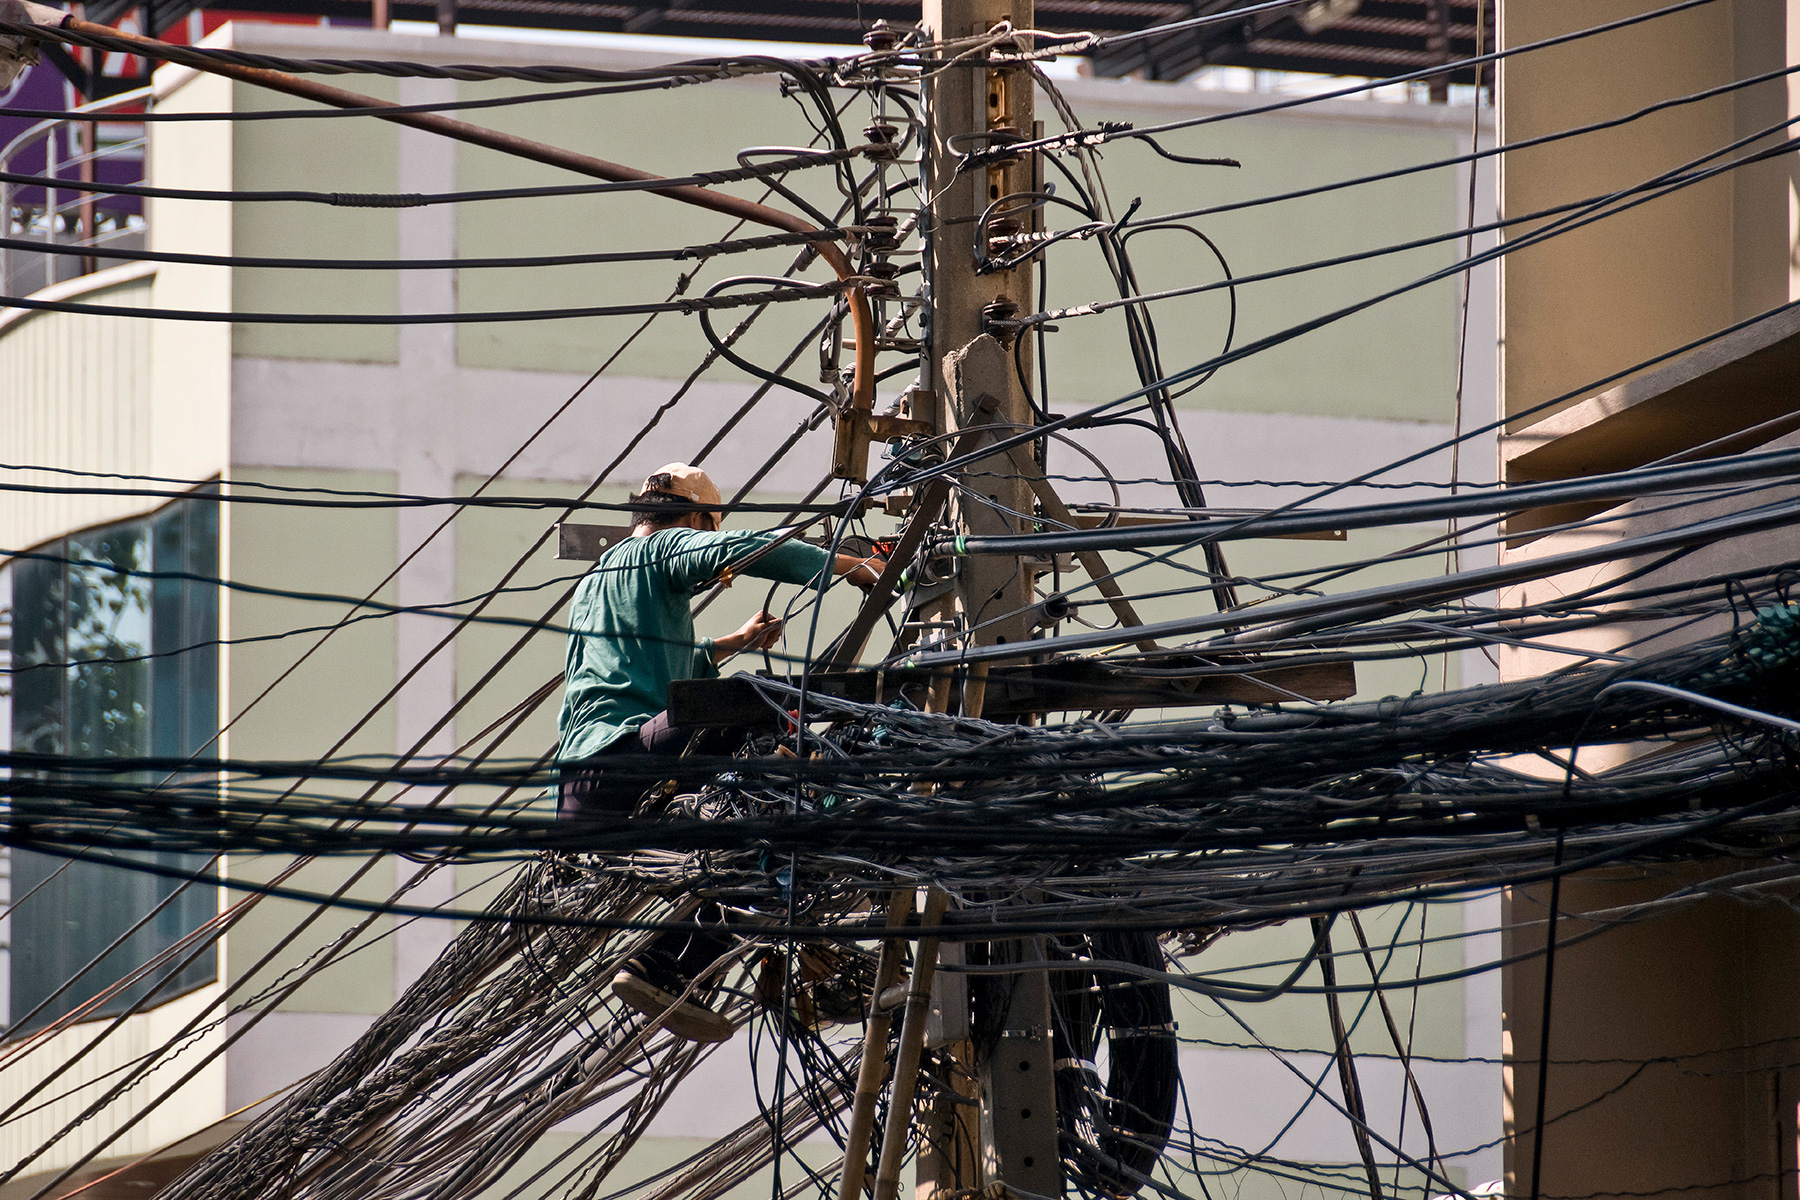 Repair worker on a telephone pole surrounded by wires.